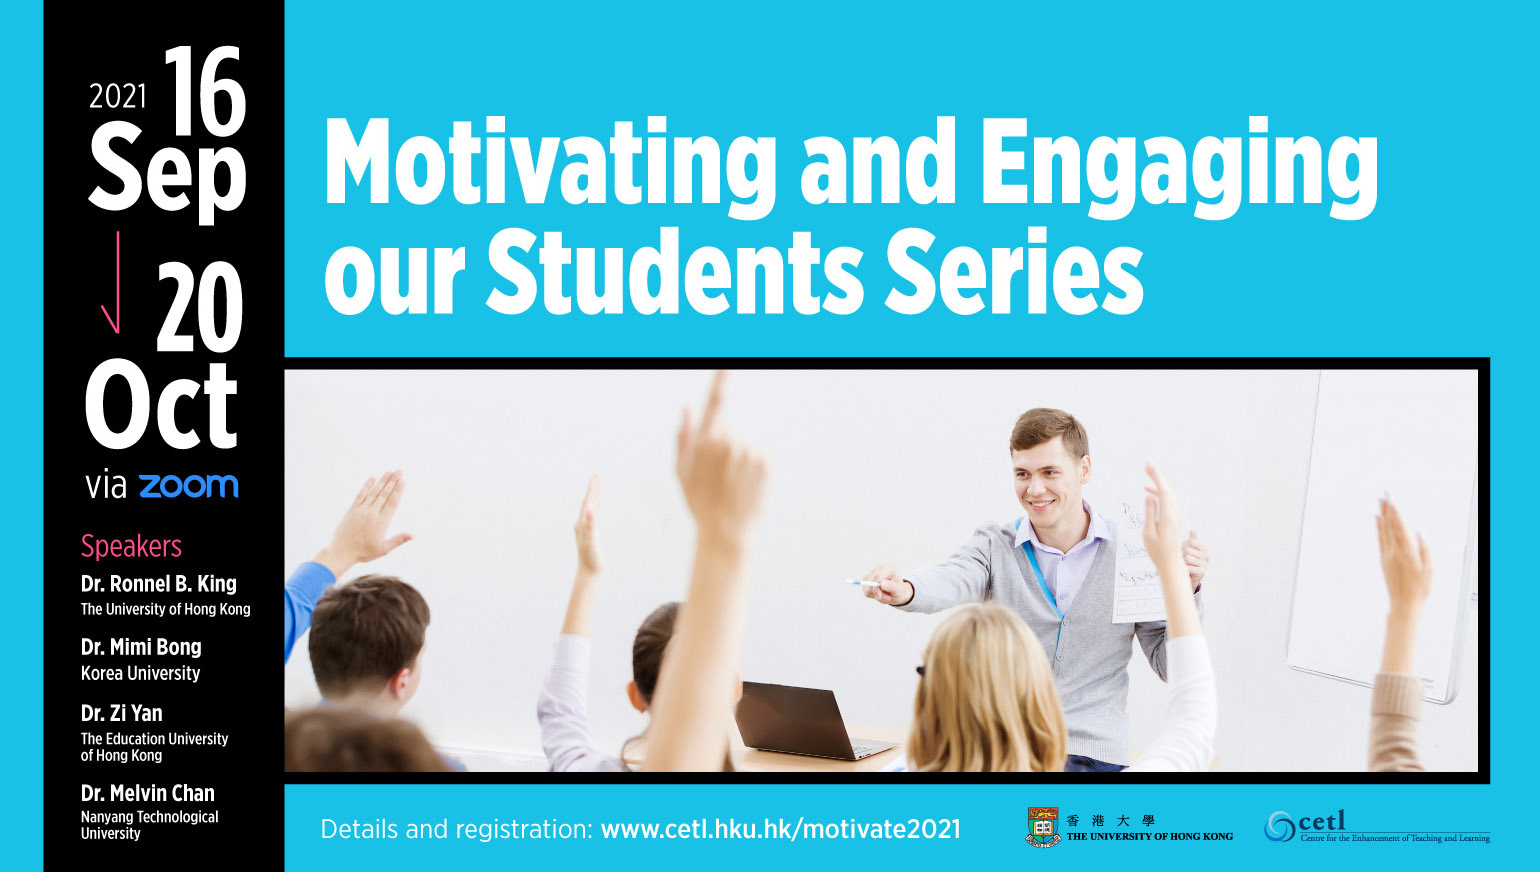 Motivating and Engaging our Students Series